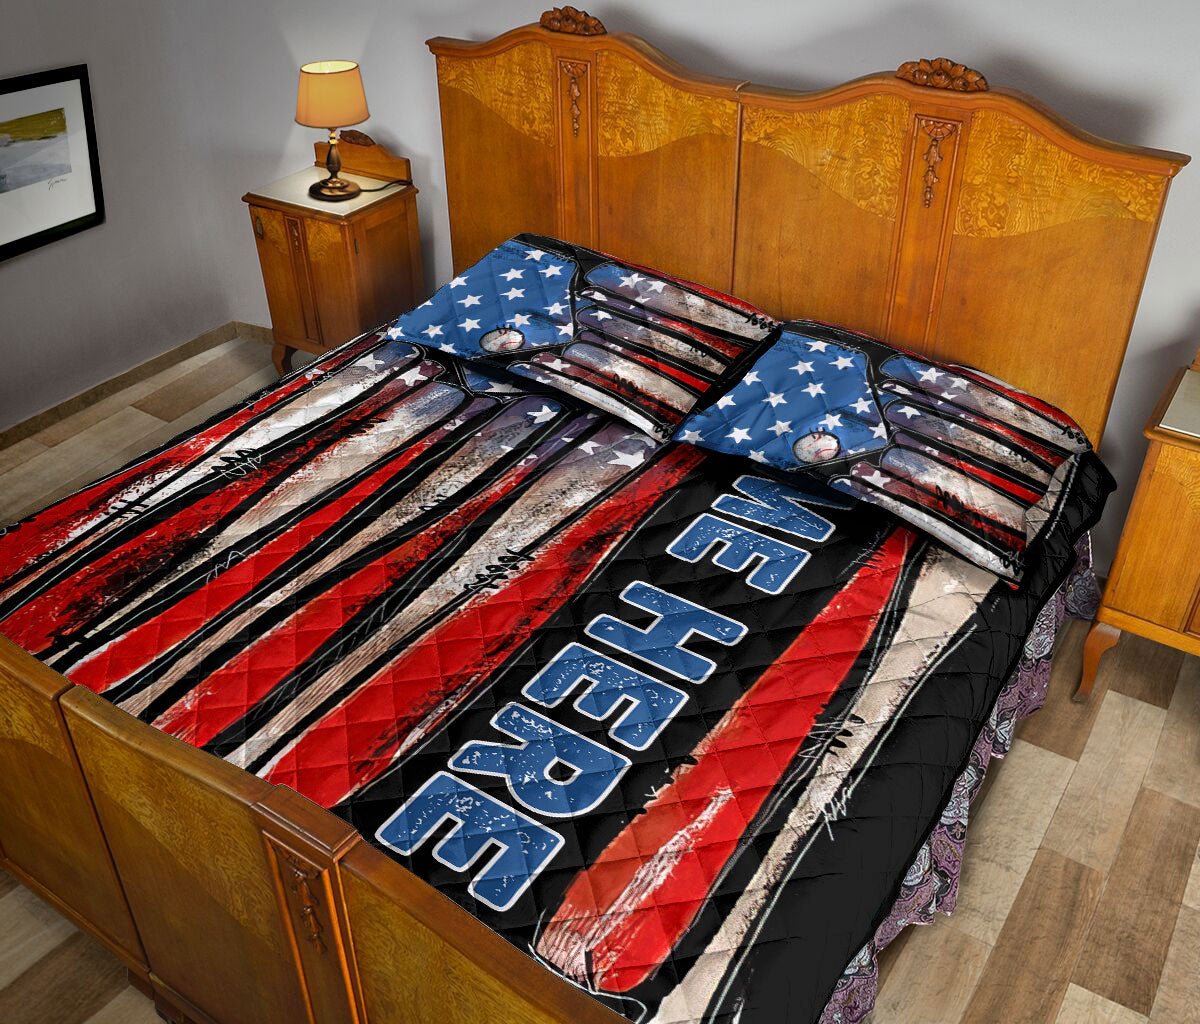 Ohaprints-Quilt-Bed-Set-Pillowcase-Baseball-Sport-American-Us-Flag-Patriot-Custom-Personalized-Name-Number-Blanket-Bedspread-Bedding-1127-King (90'' x 100'')